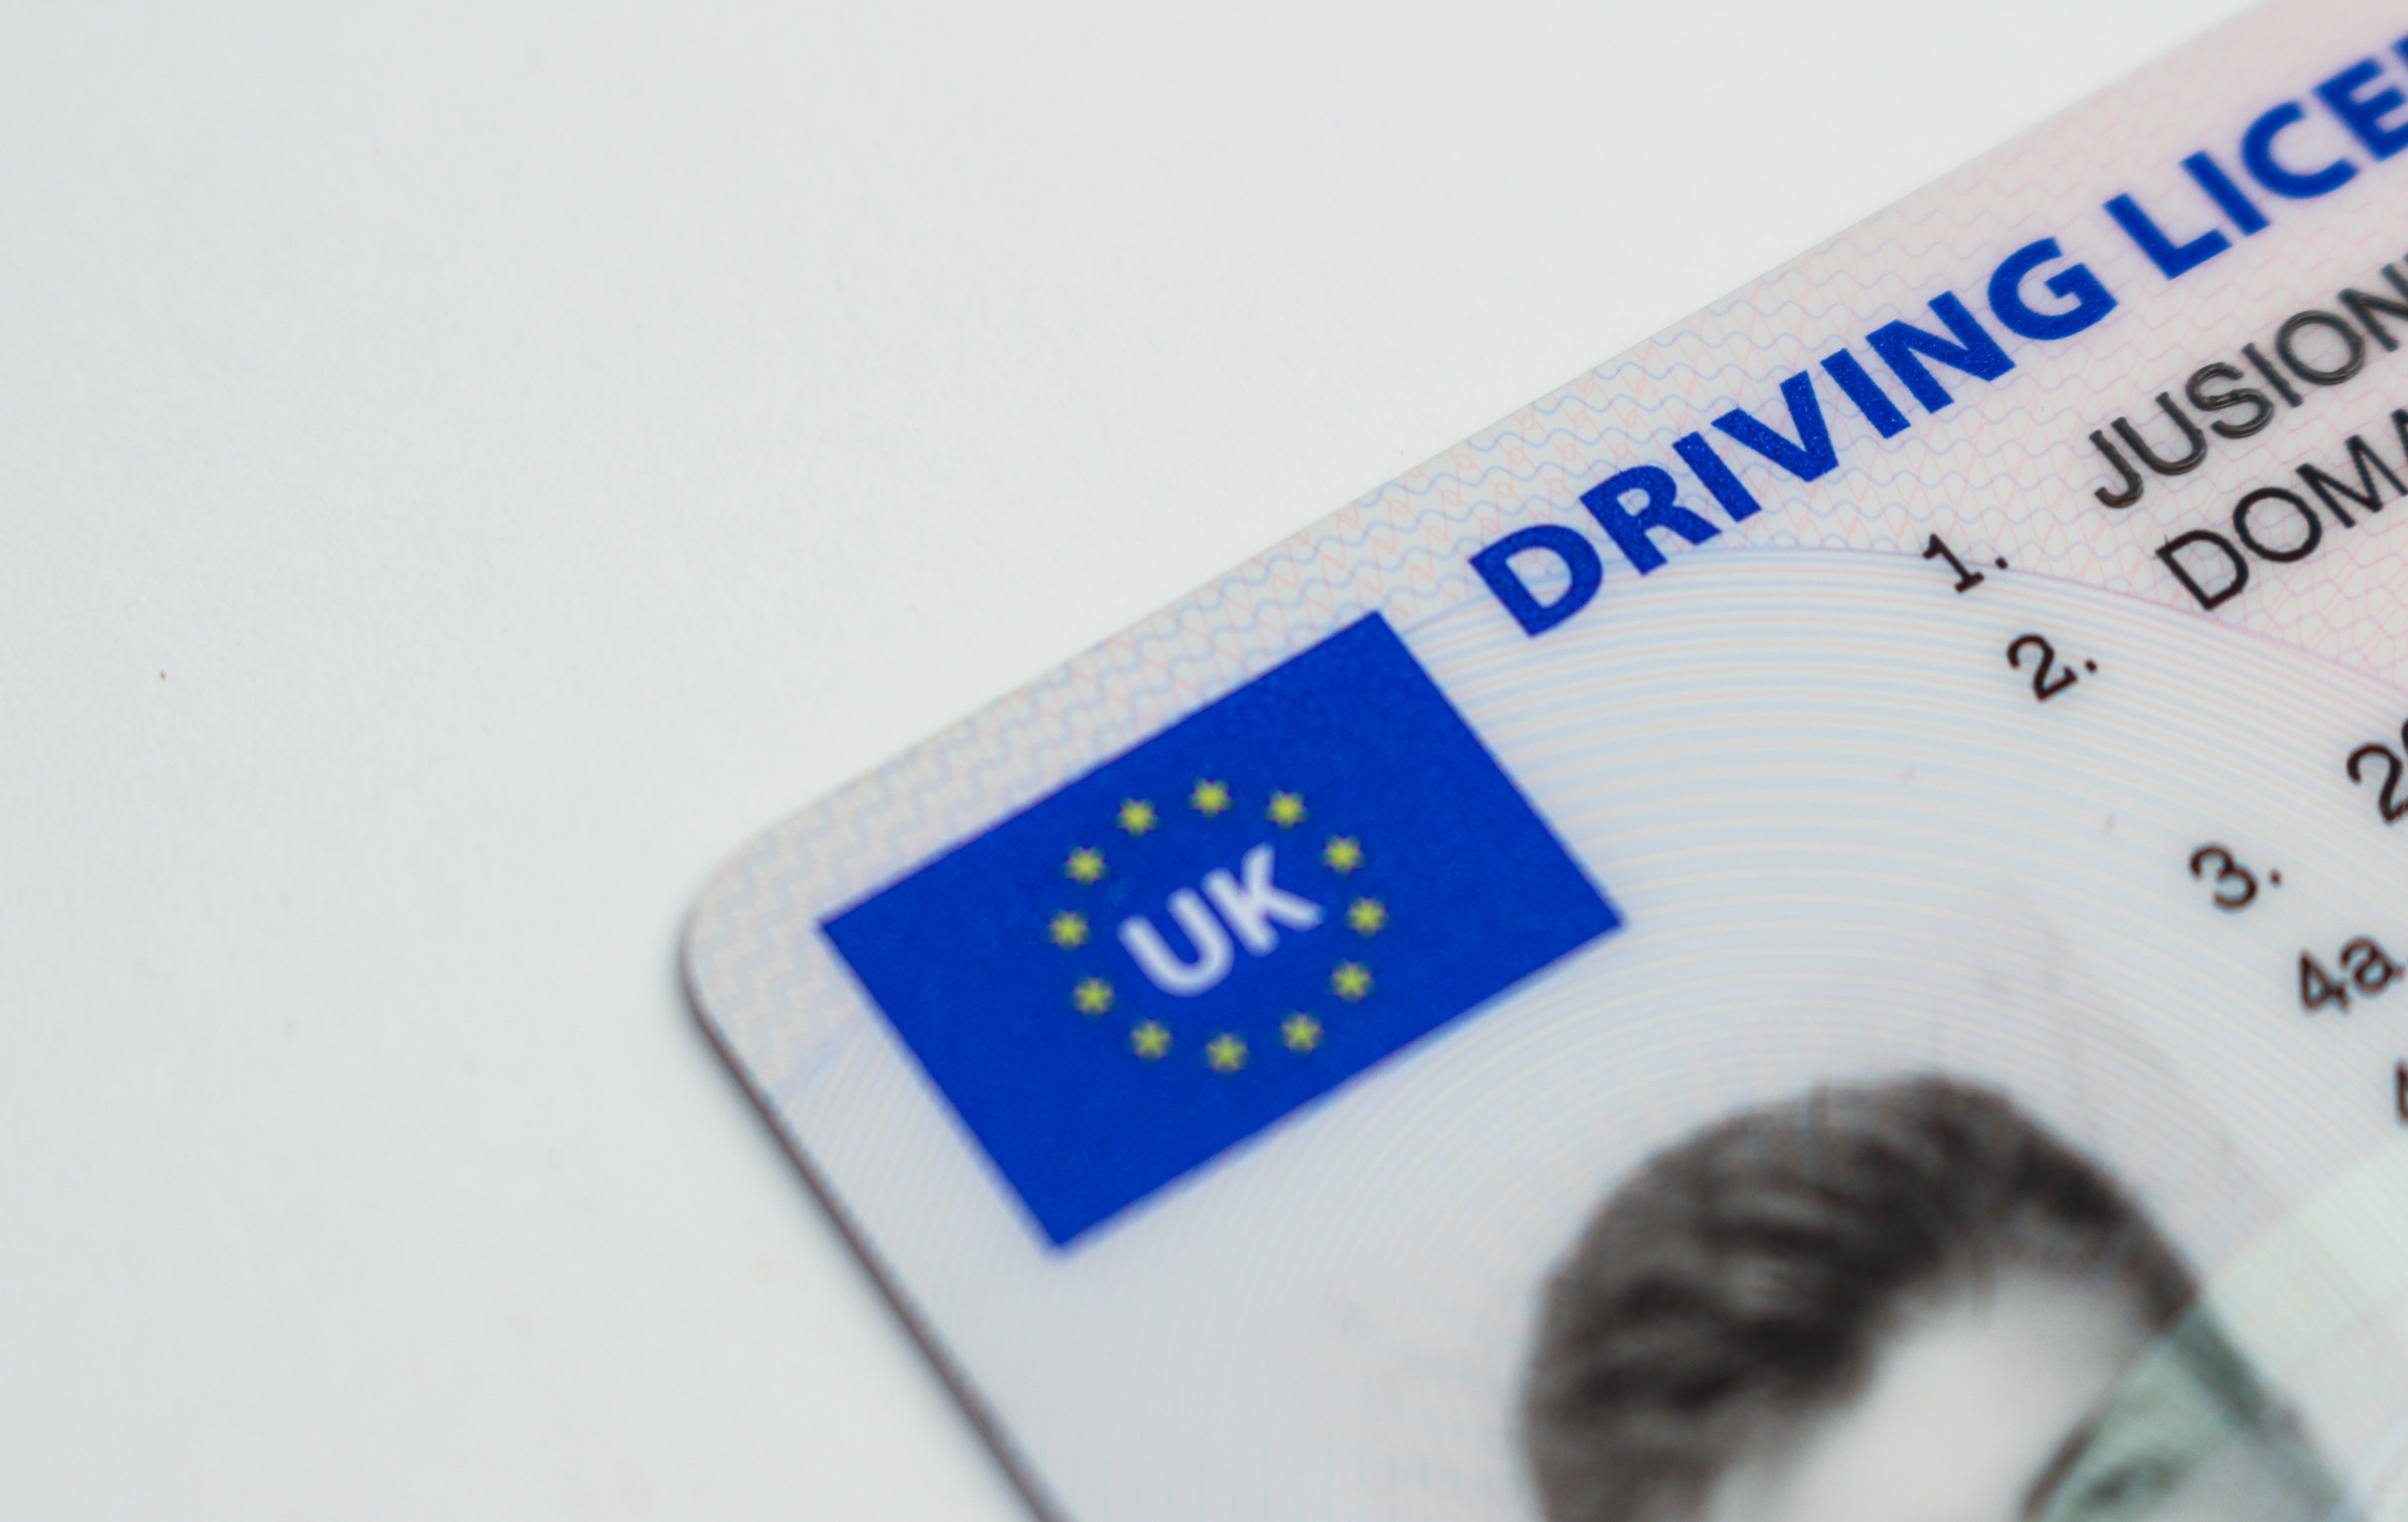 Receive your driving license if you learn to drive in a week.